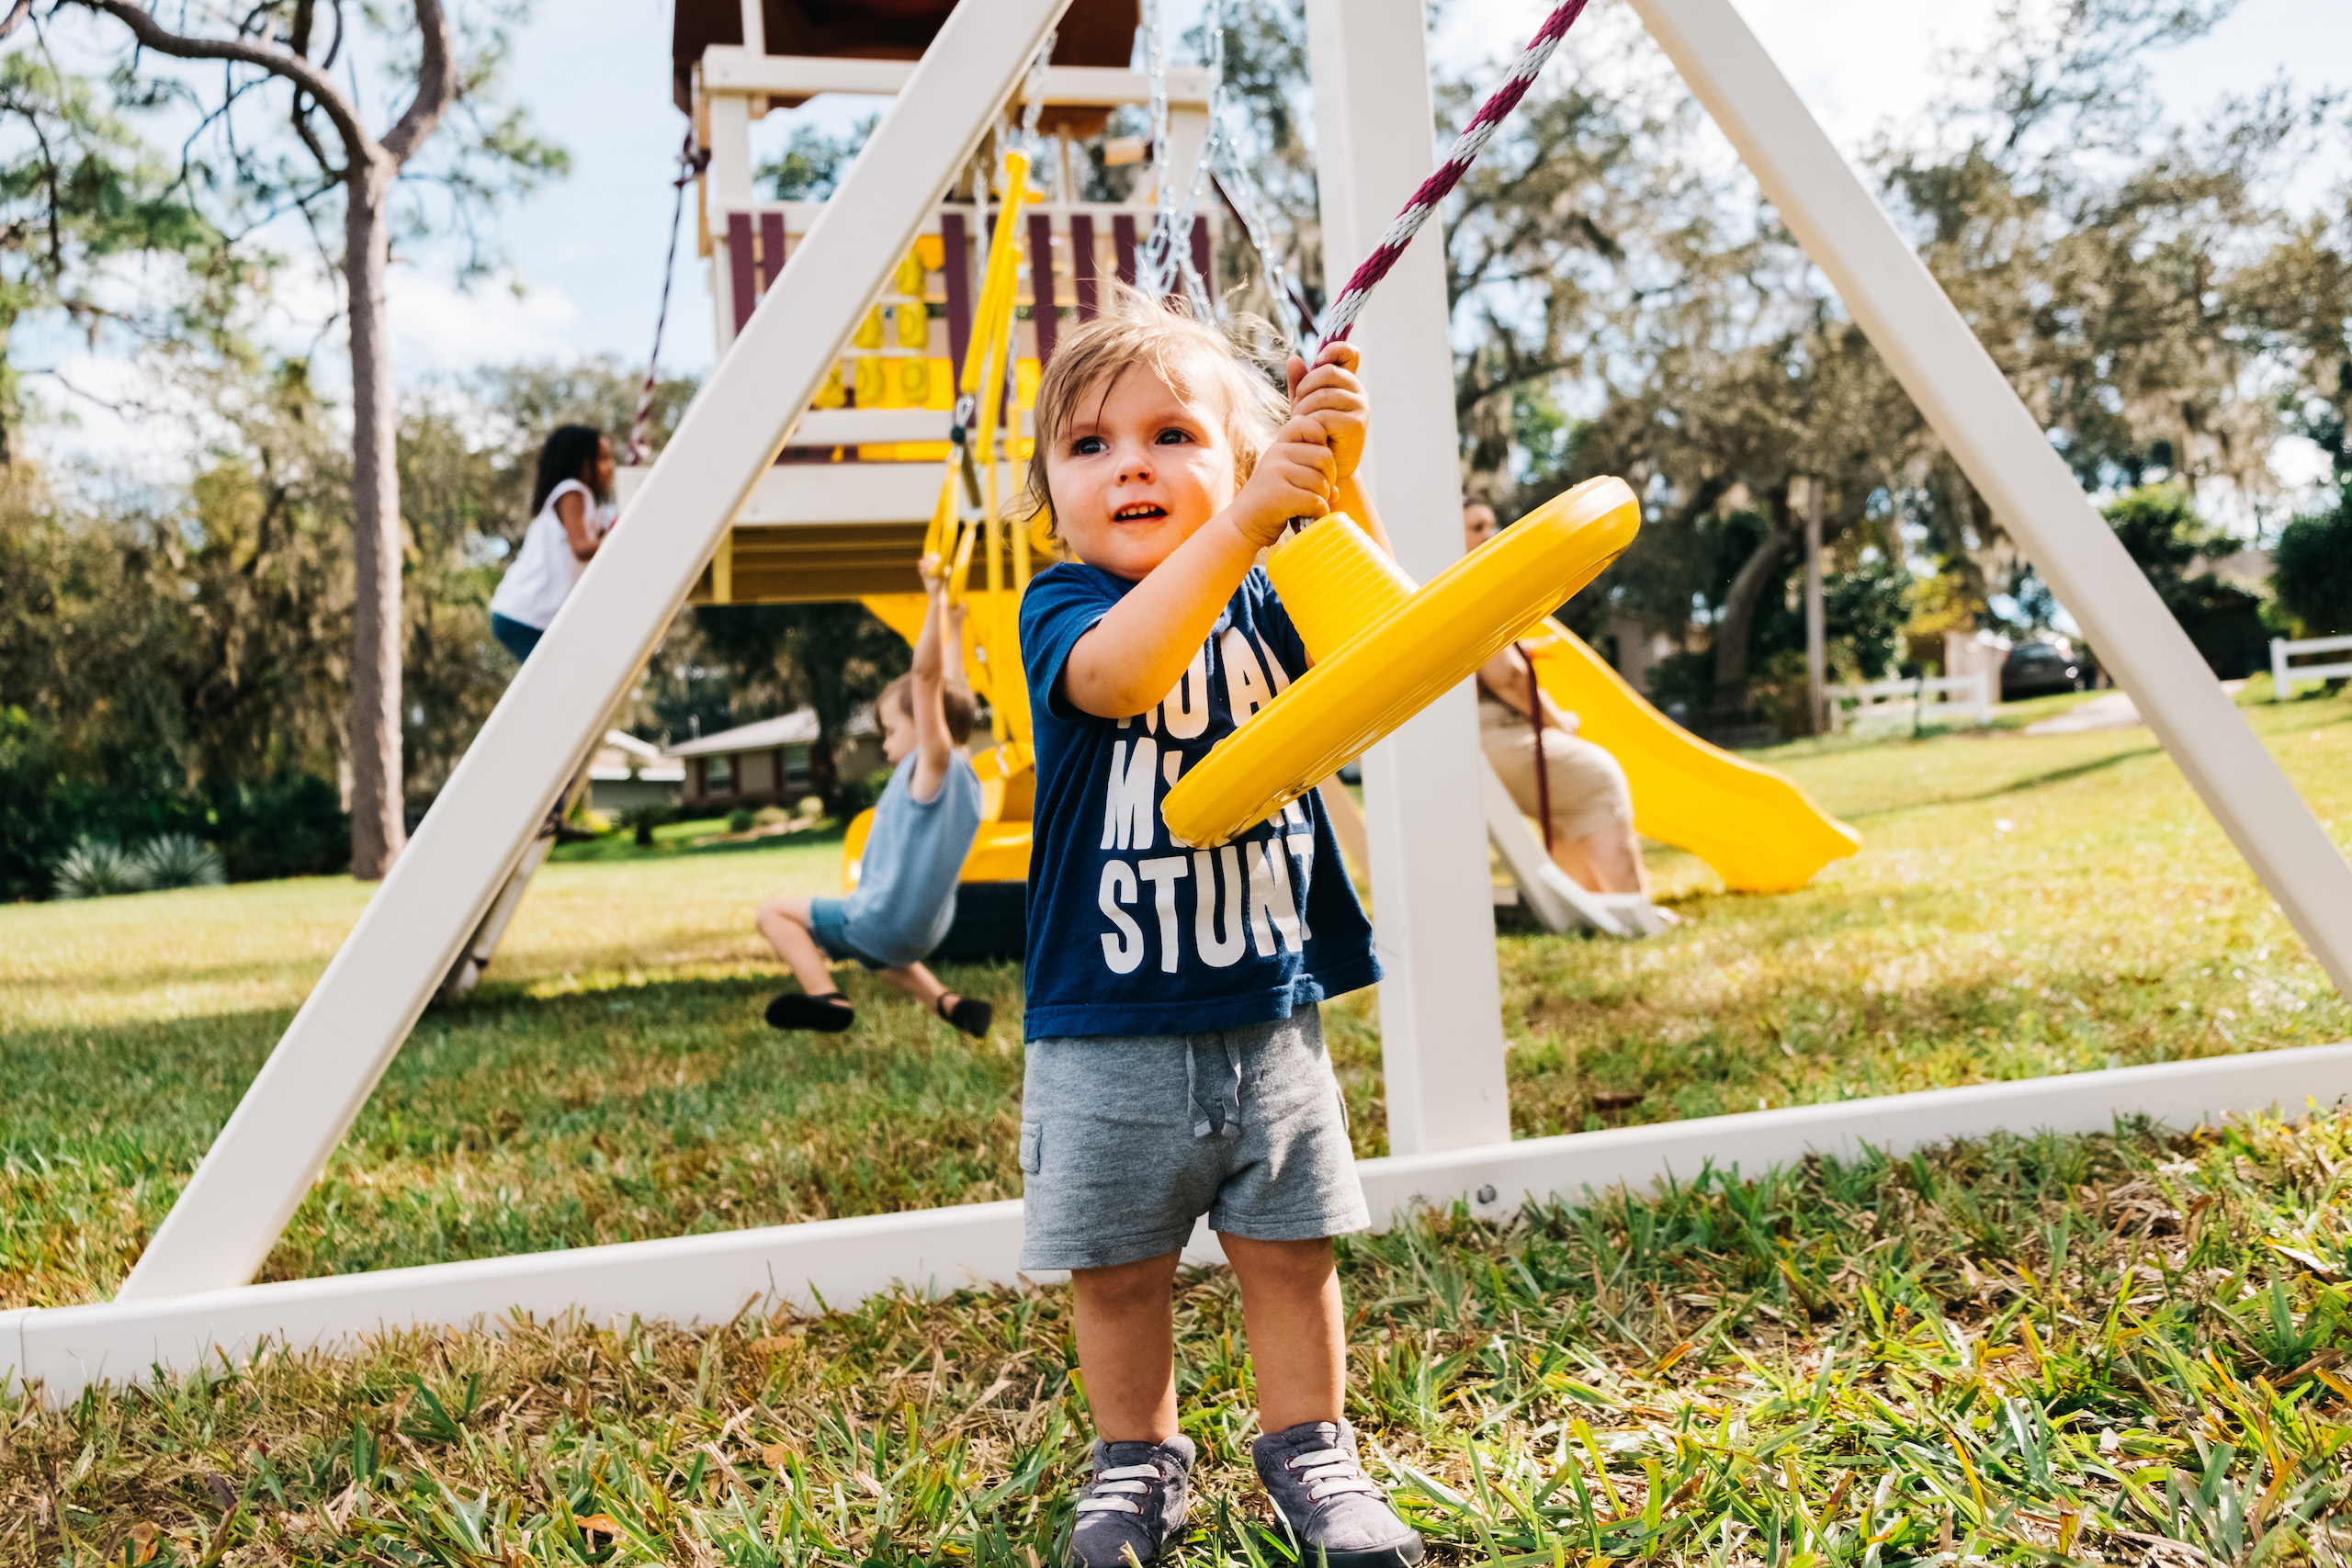 How To Make A Swing Set Safe For Toddler's